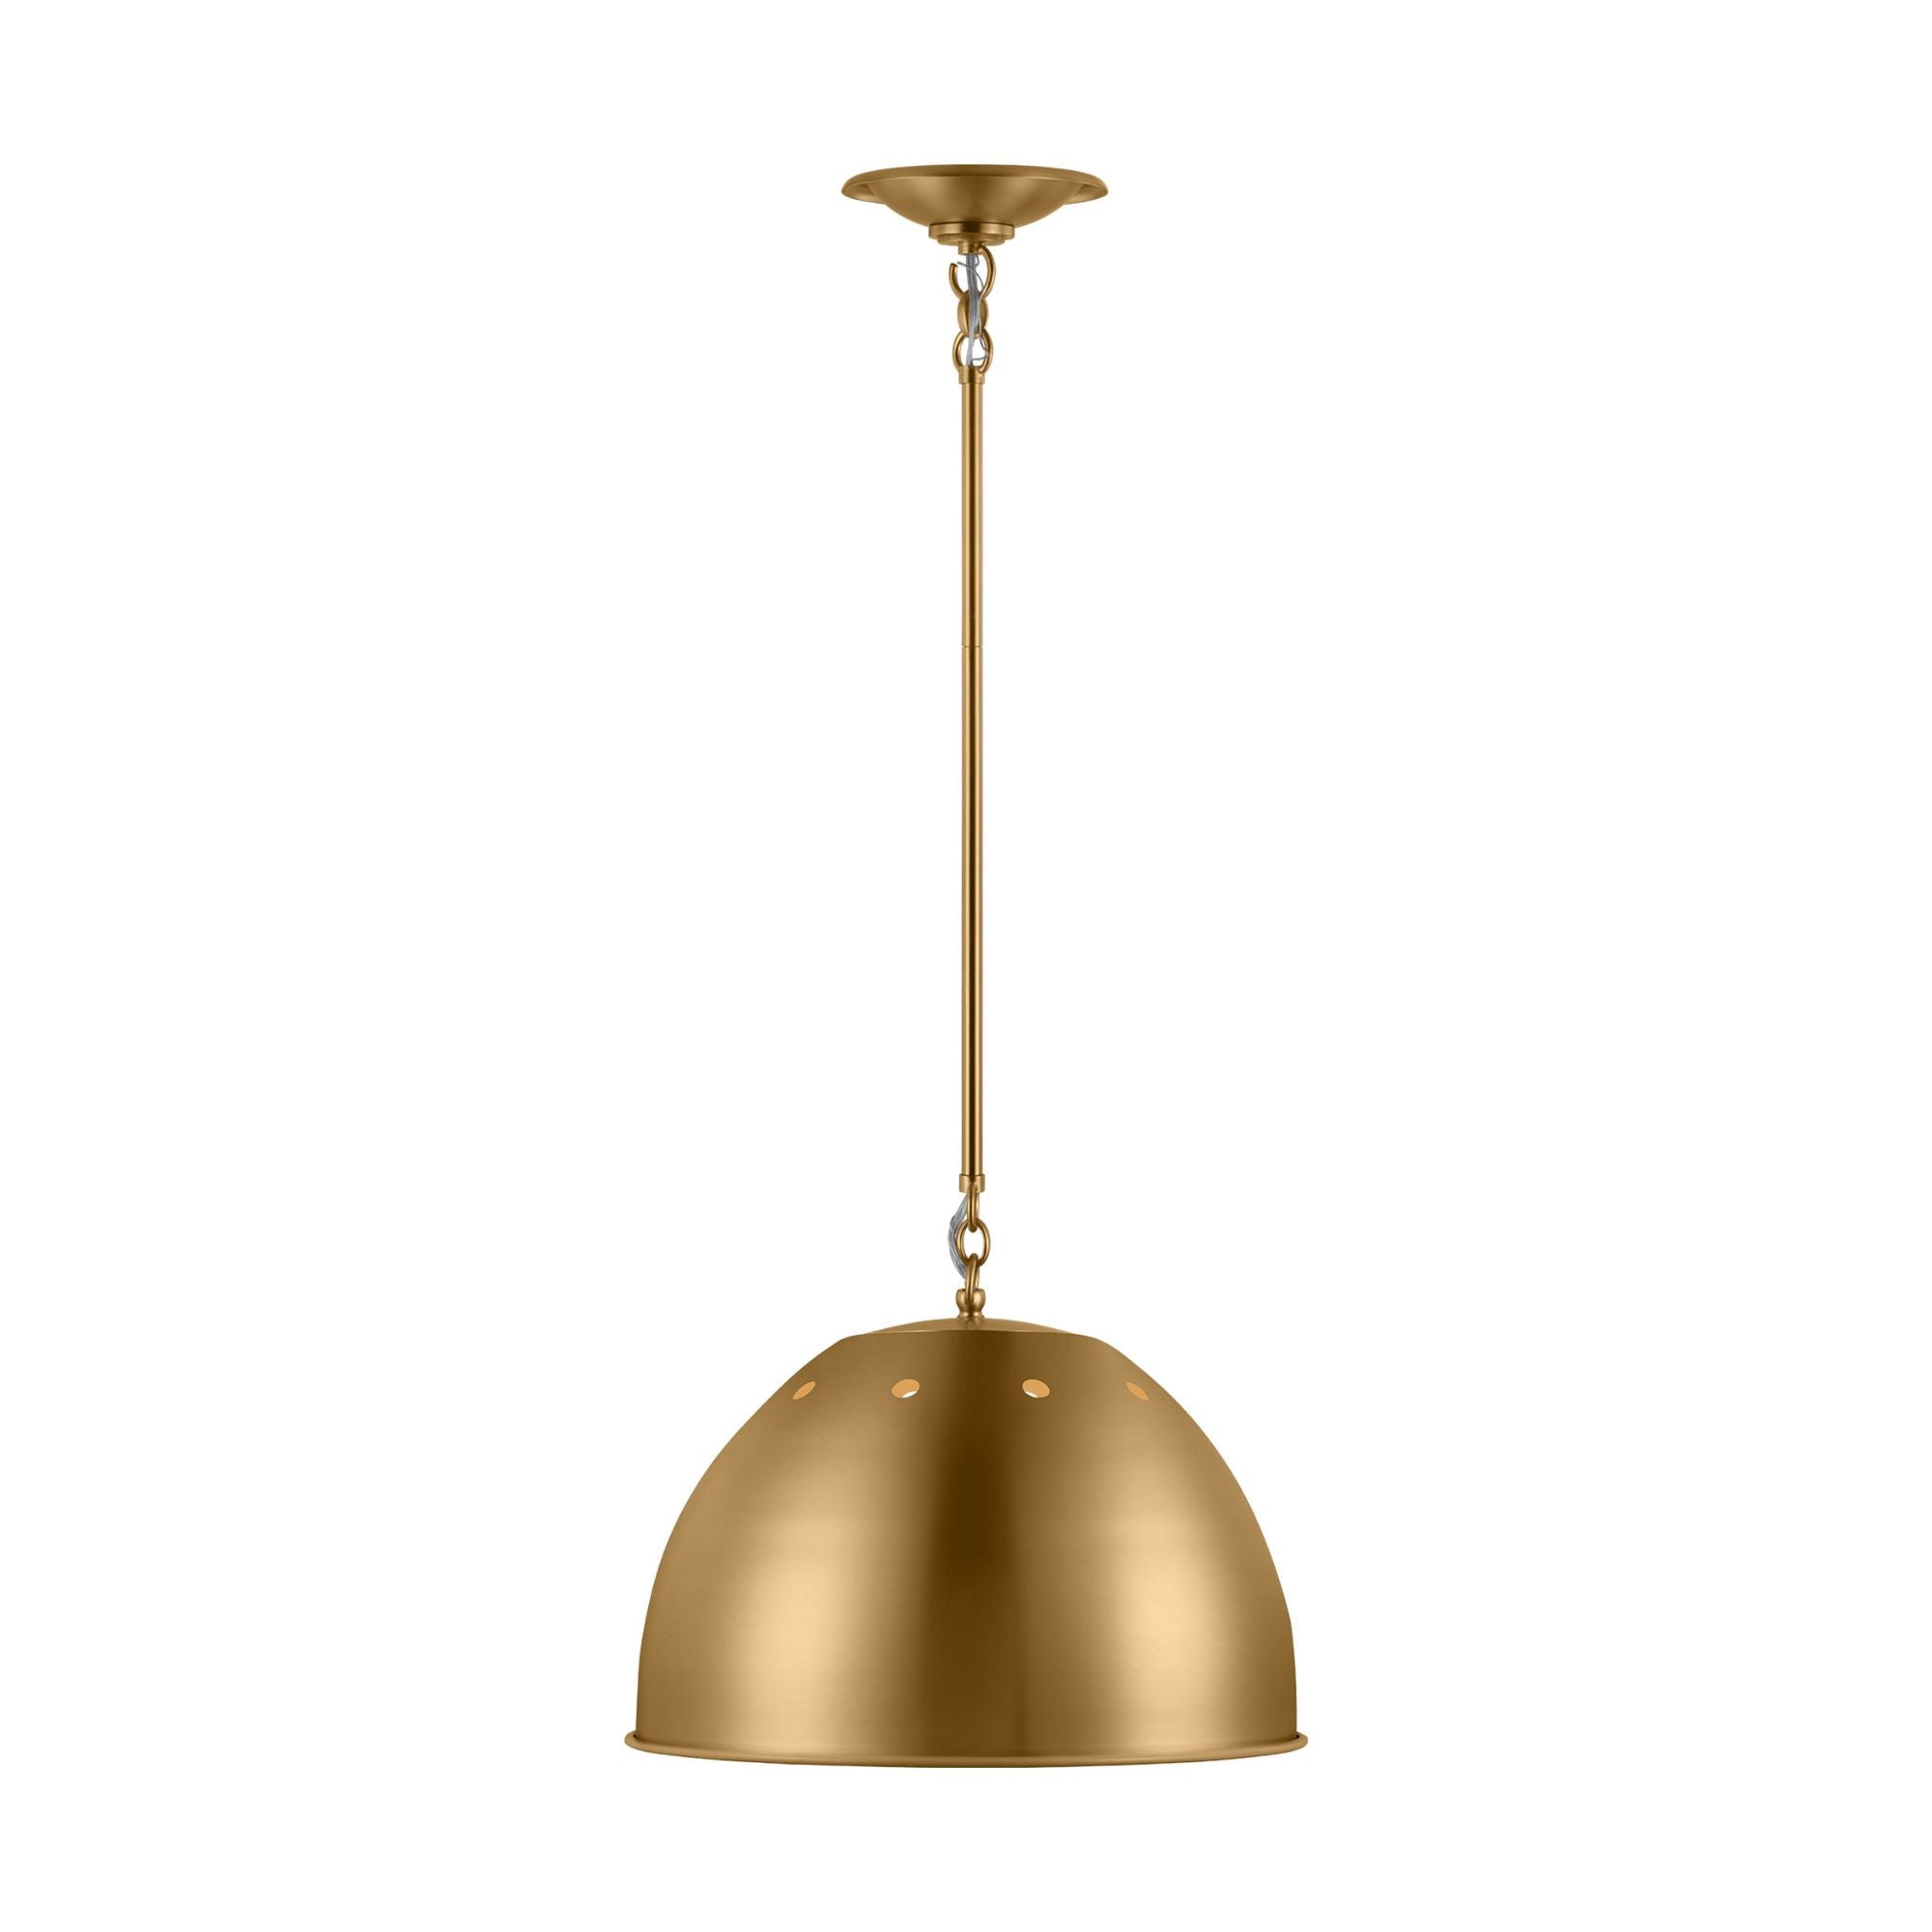 Thomas O'Brien Robbie Large Pendant in Burnished Brass